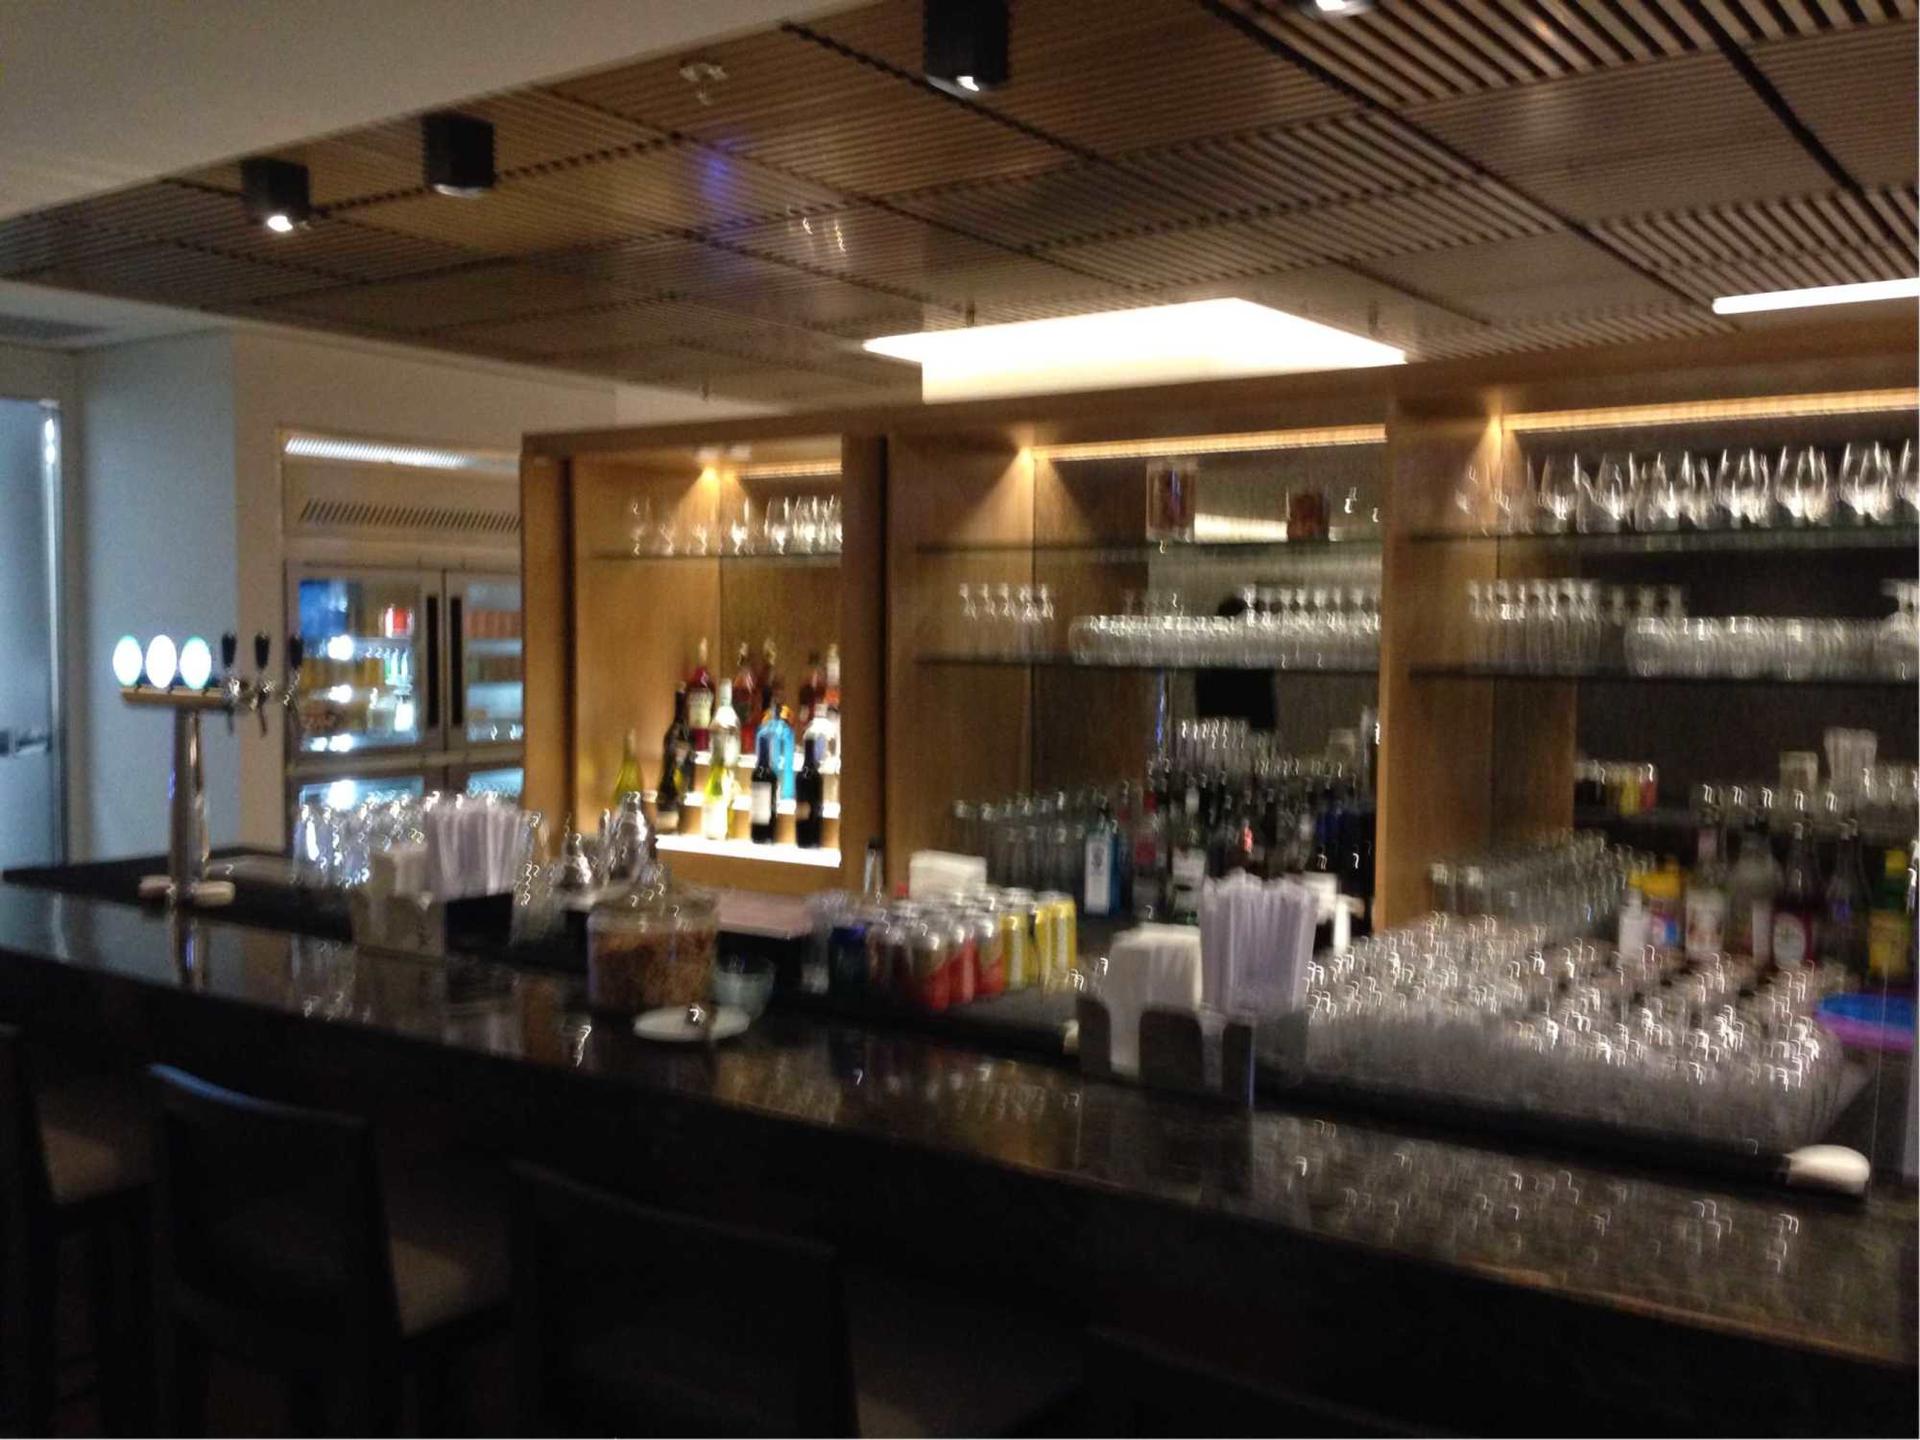 Singapore Airlines SilverKris Business Class Lounge image 17 of 68